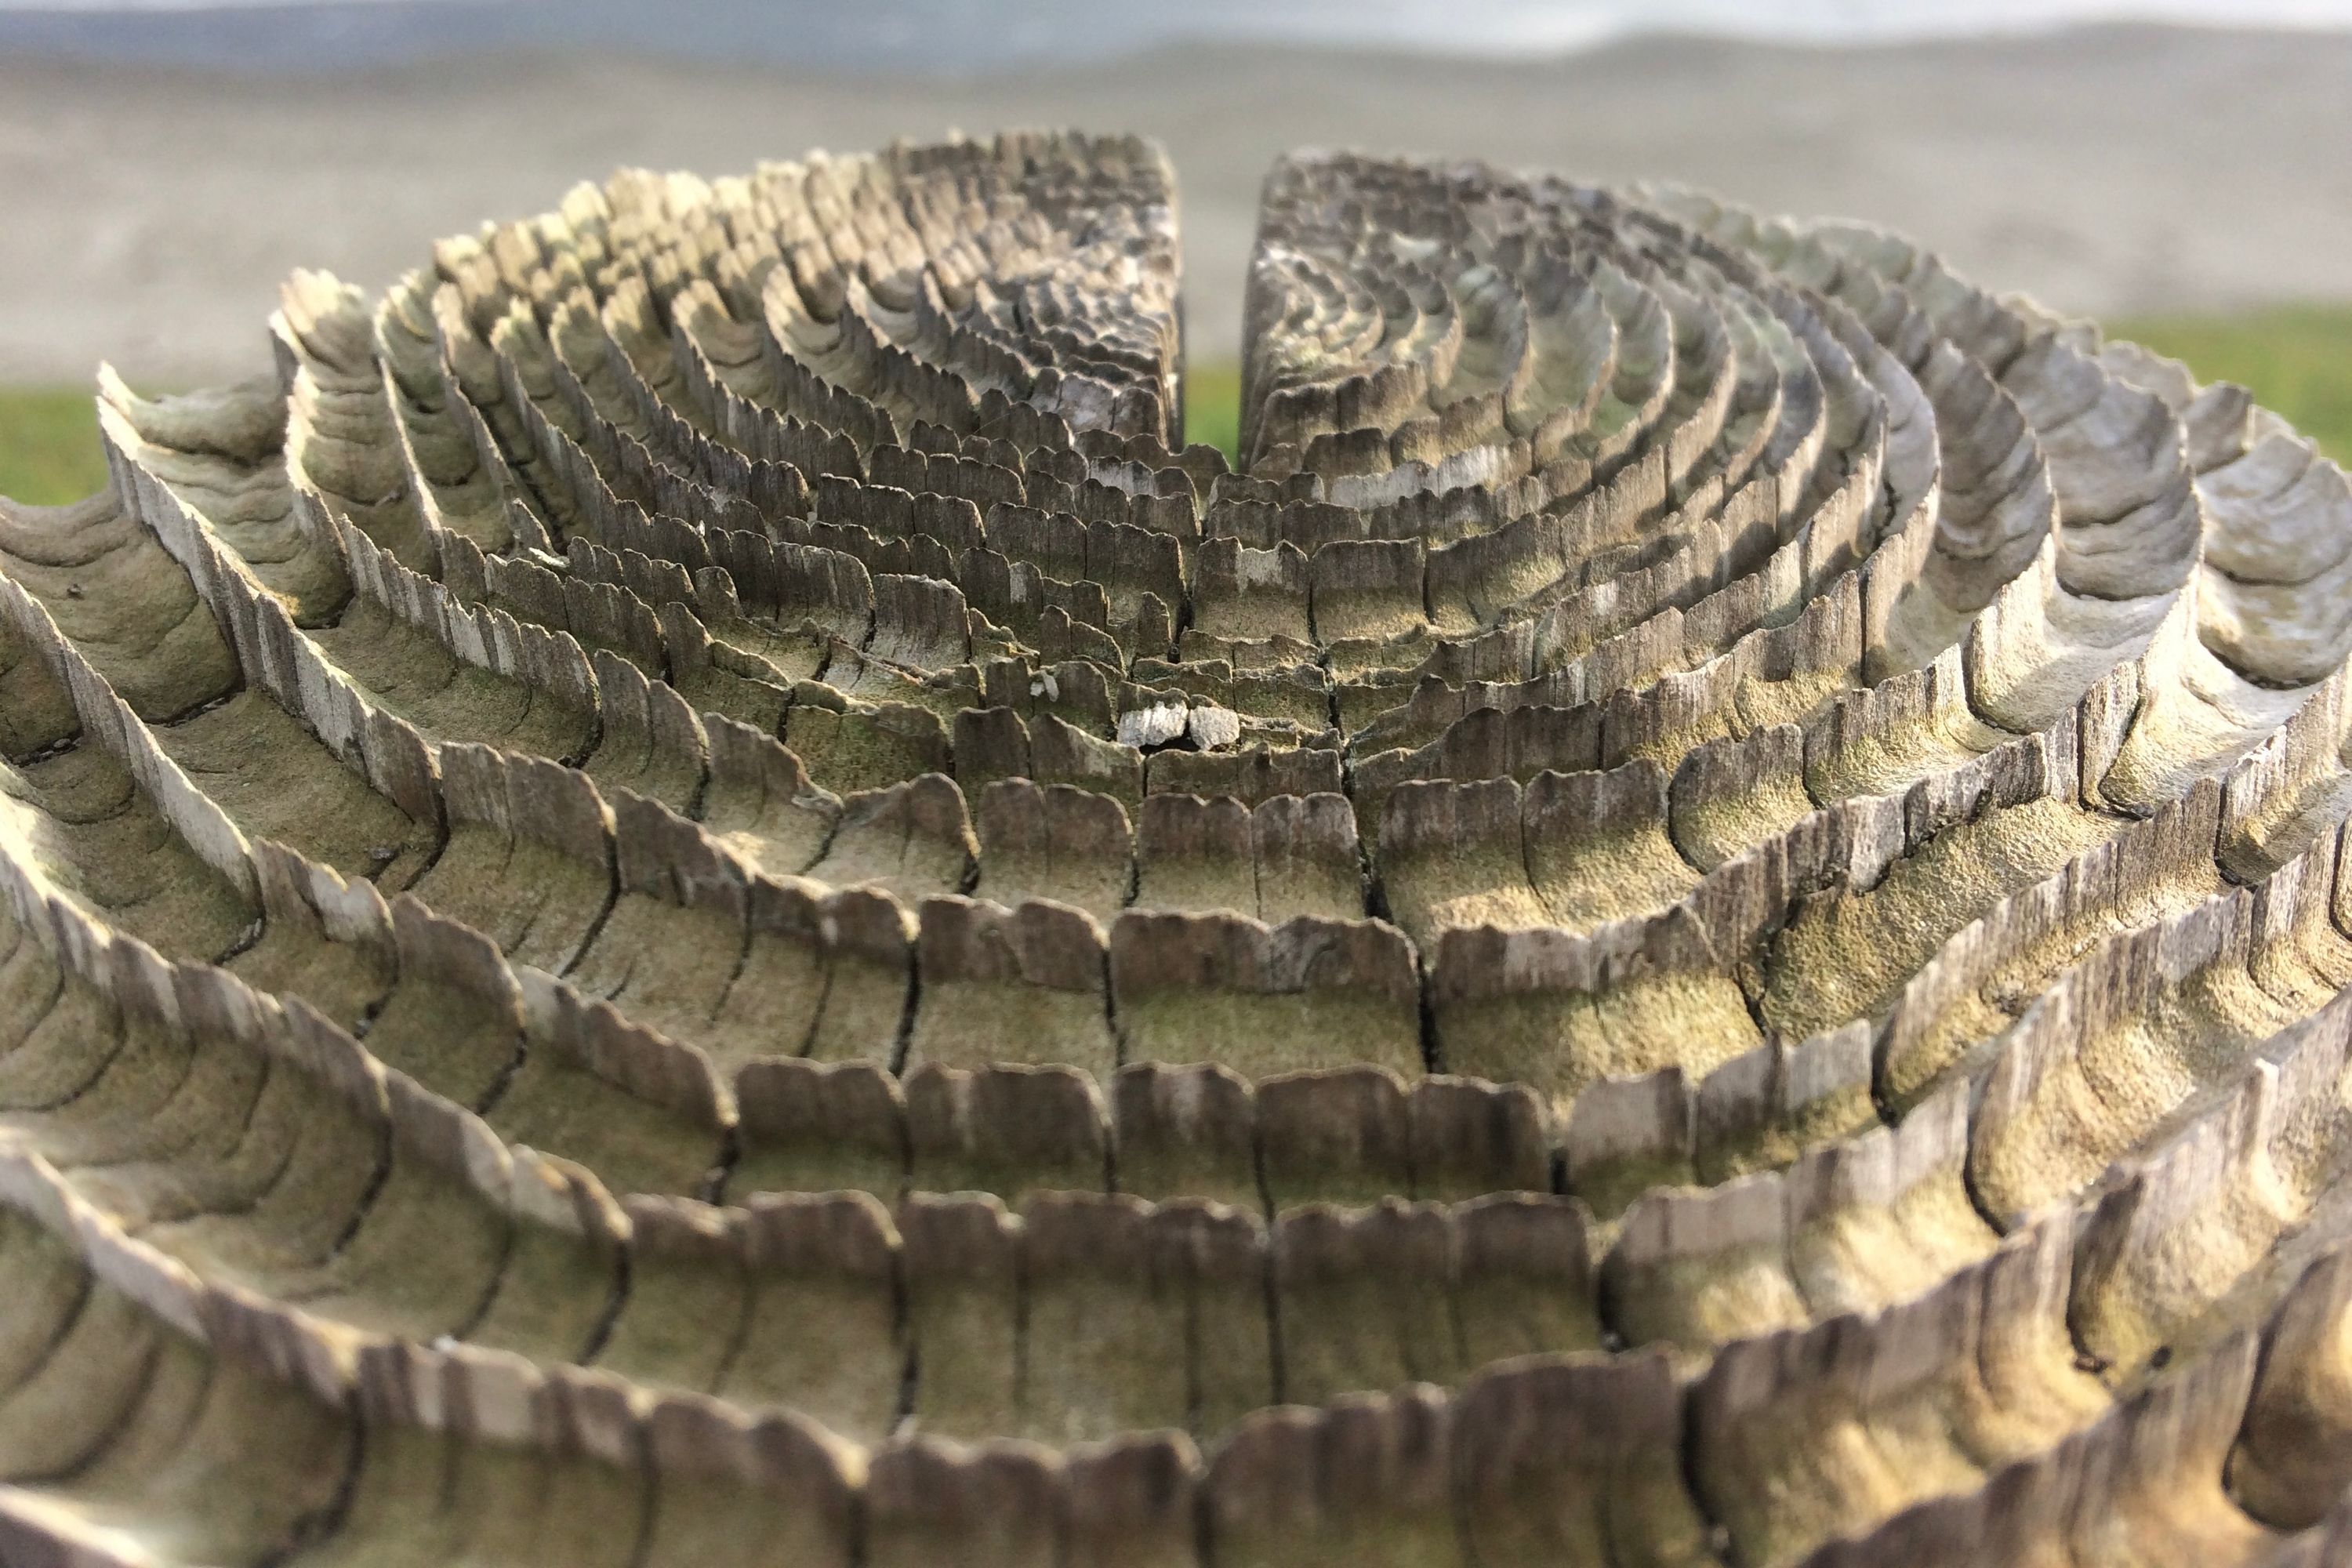 The top of a wooden column rail eroded in a strange way, with ridges rising in concentric circles.